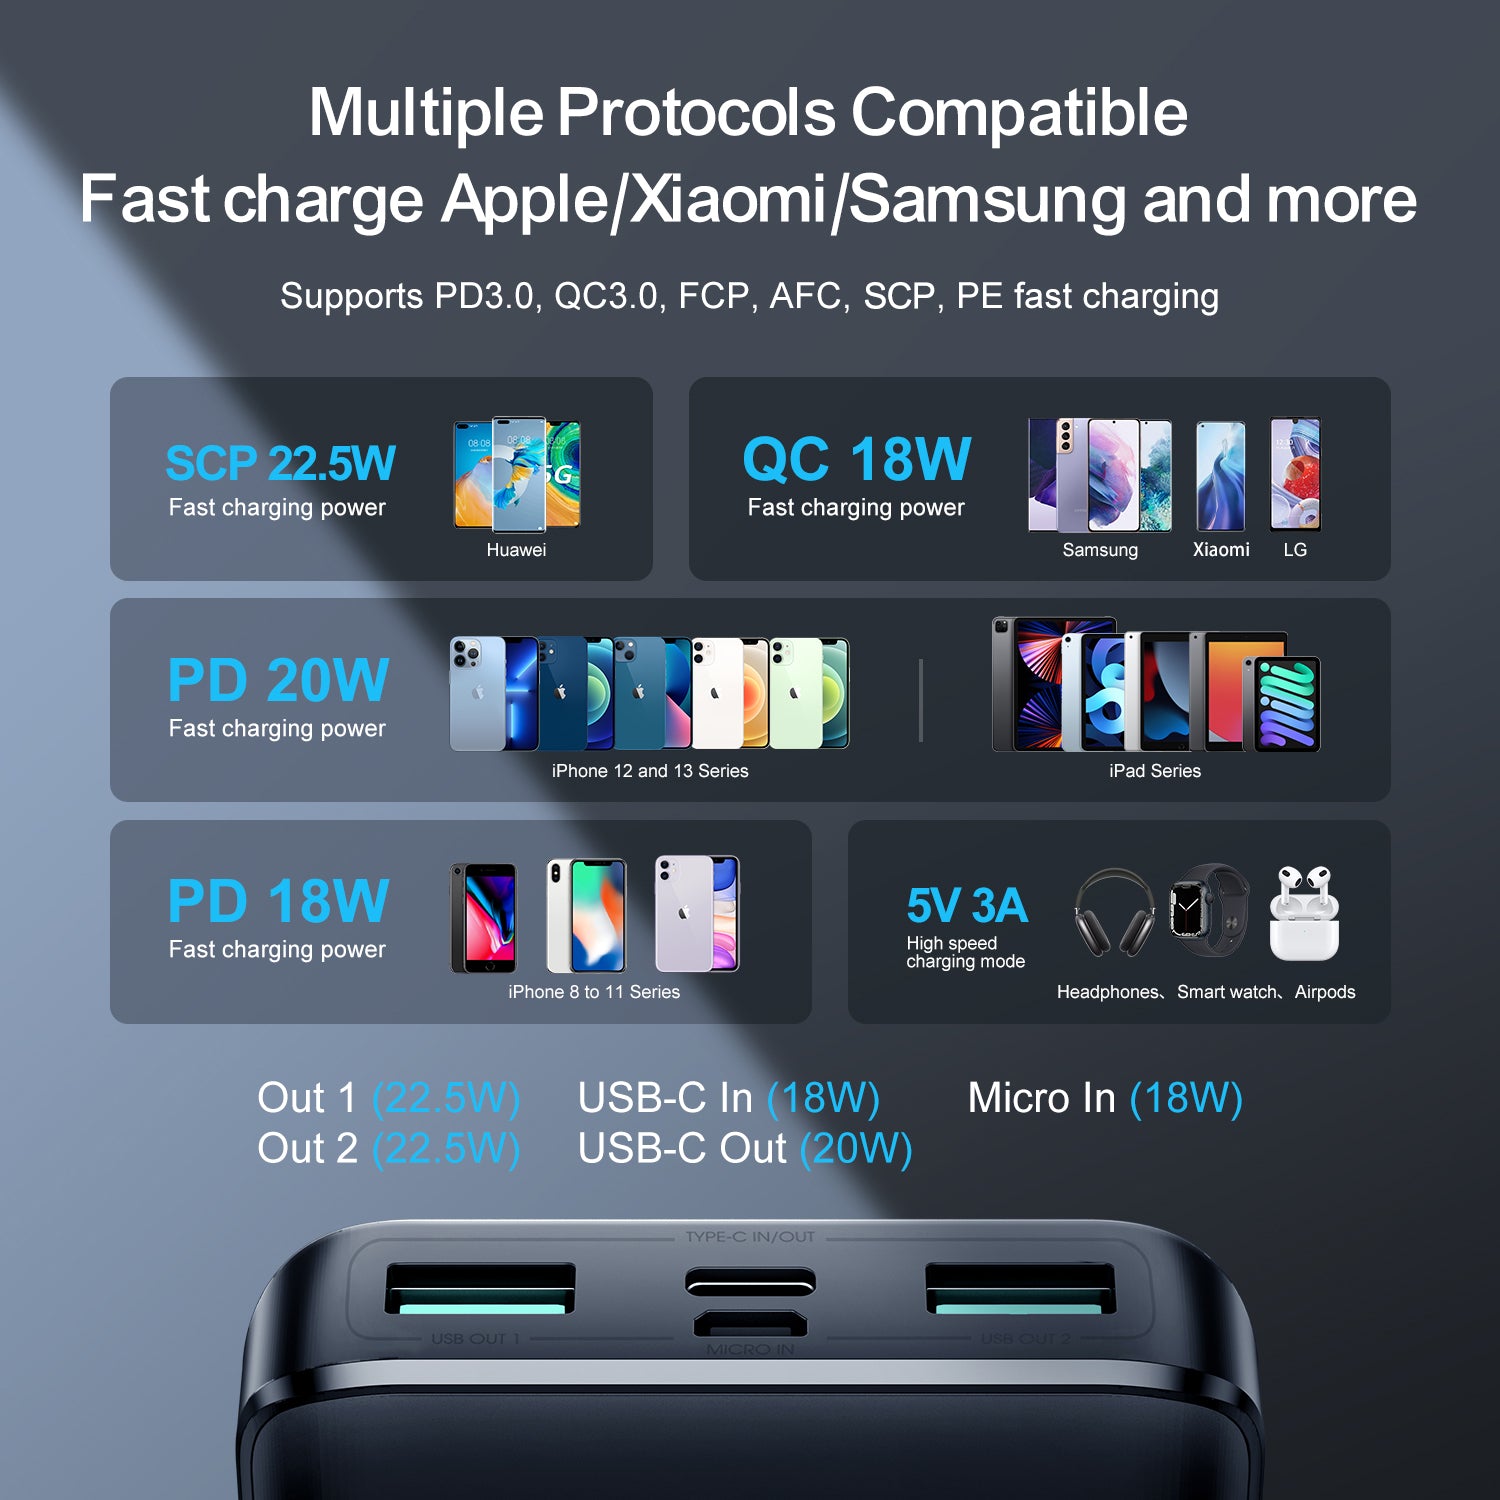 Multiple protocols compatible fast charge Apple/Xiaomi/Samsung and more